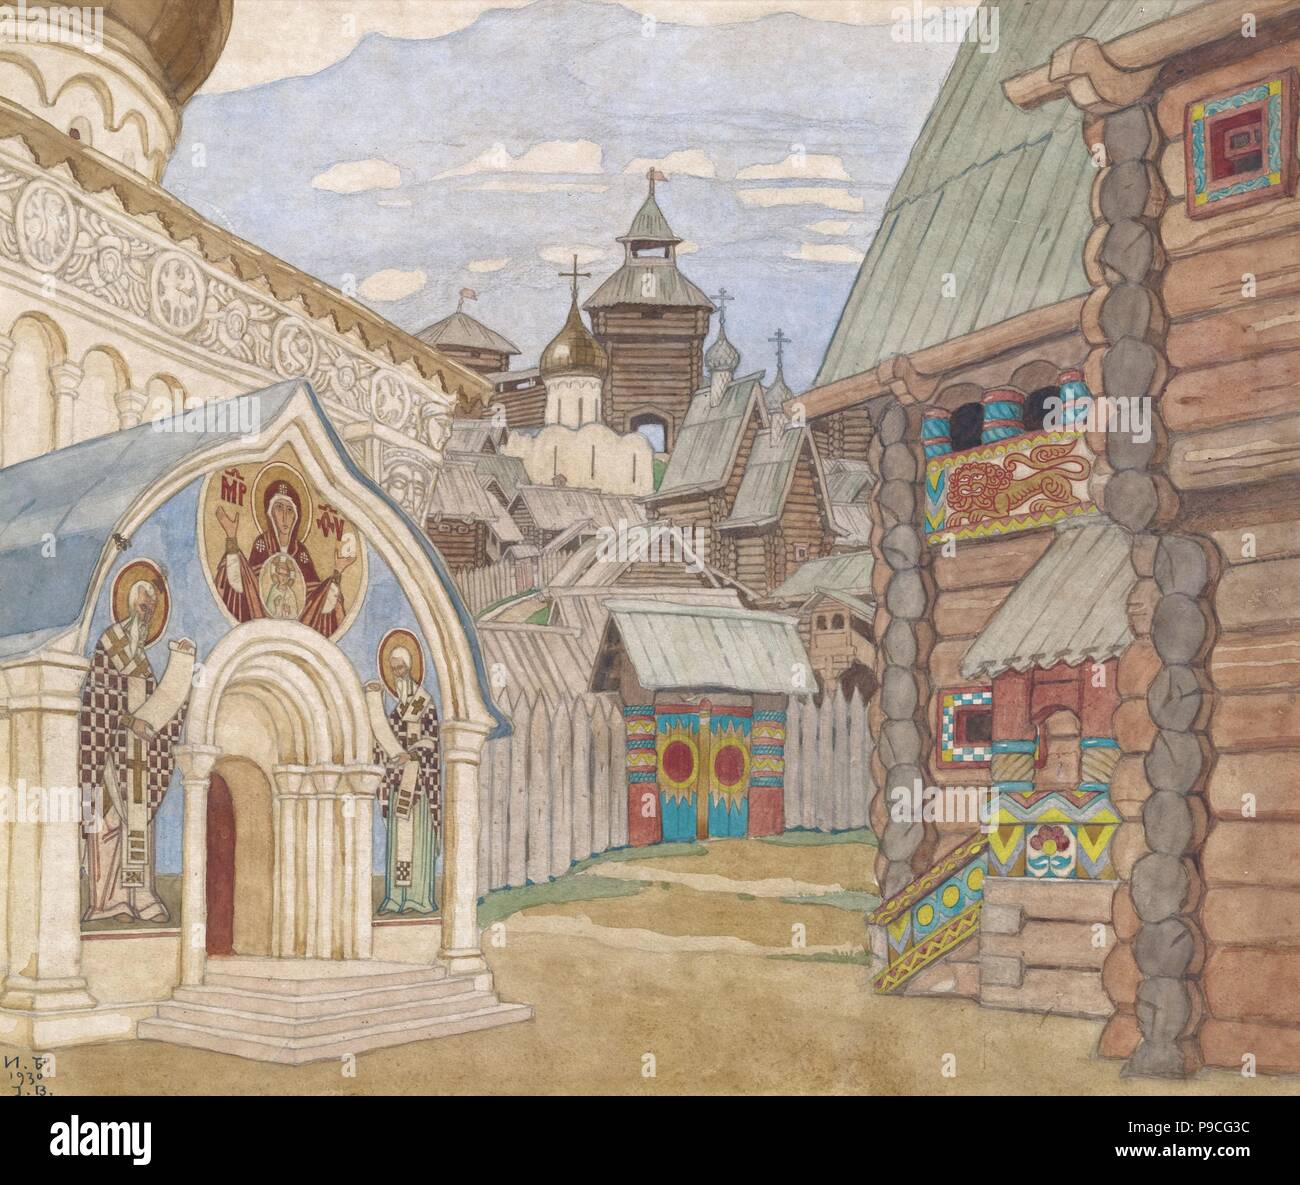 Russian Village. Stage design for the opera The Tale of Tsar Saltan by N. Rimsky-Korsakov. Museum: PRIVATE COLLECTION. Stock Photo